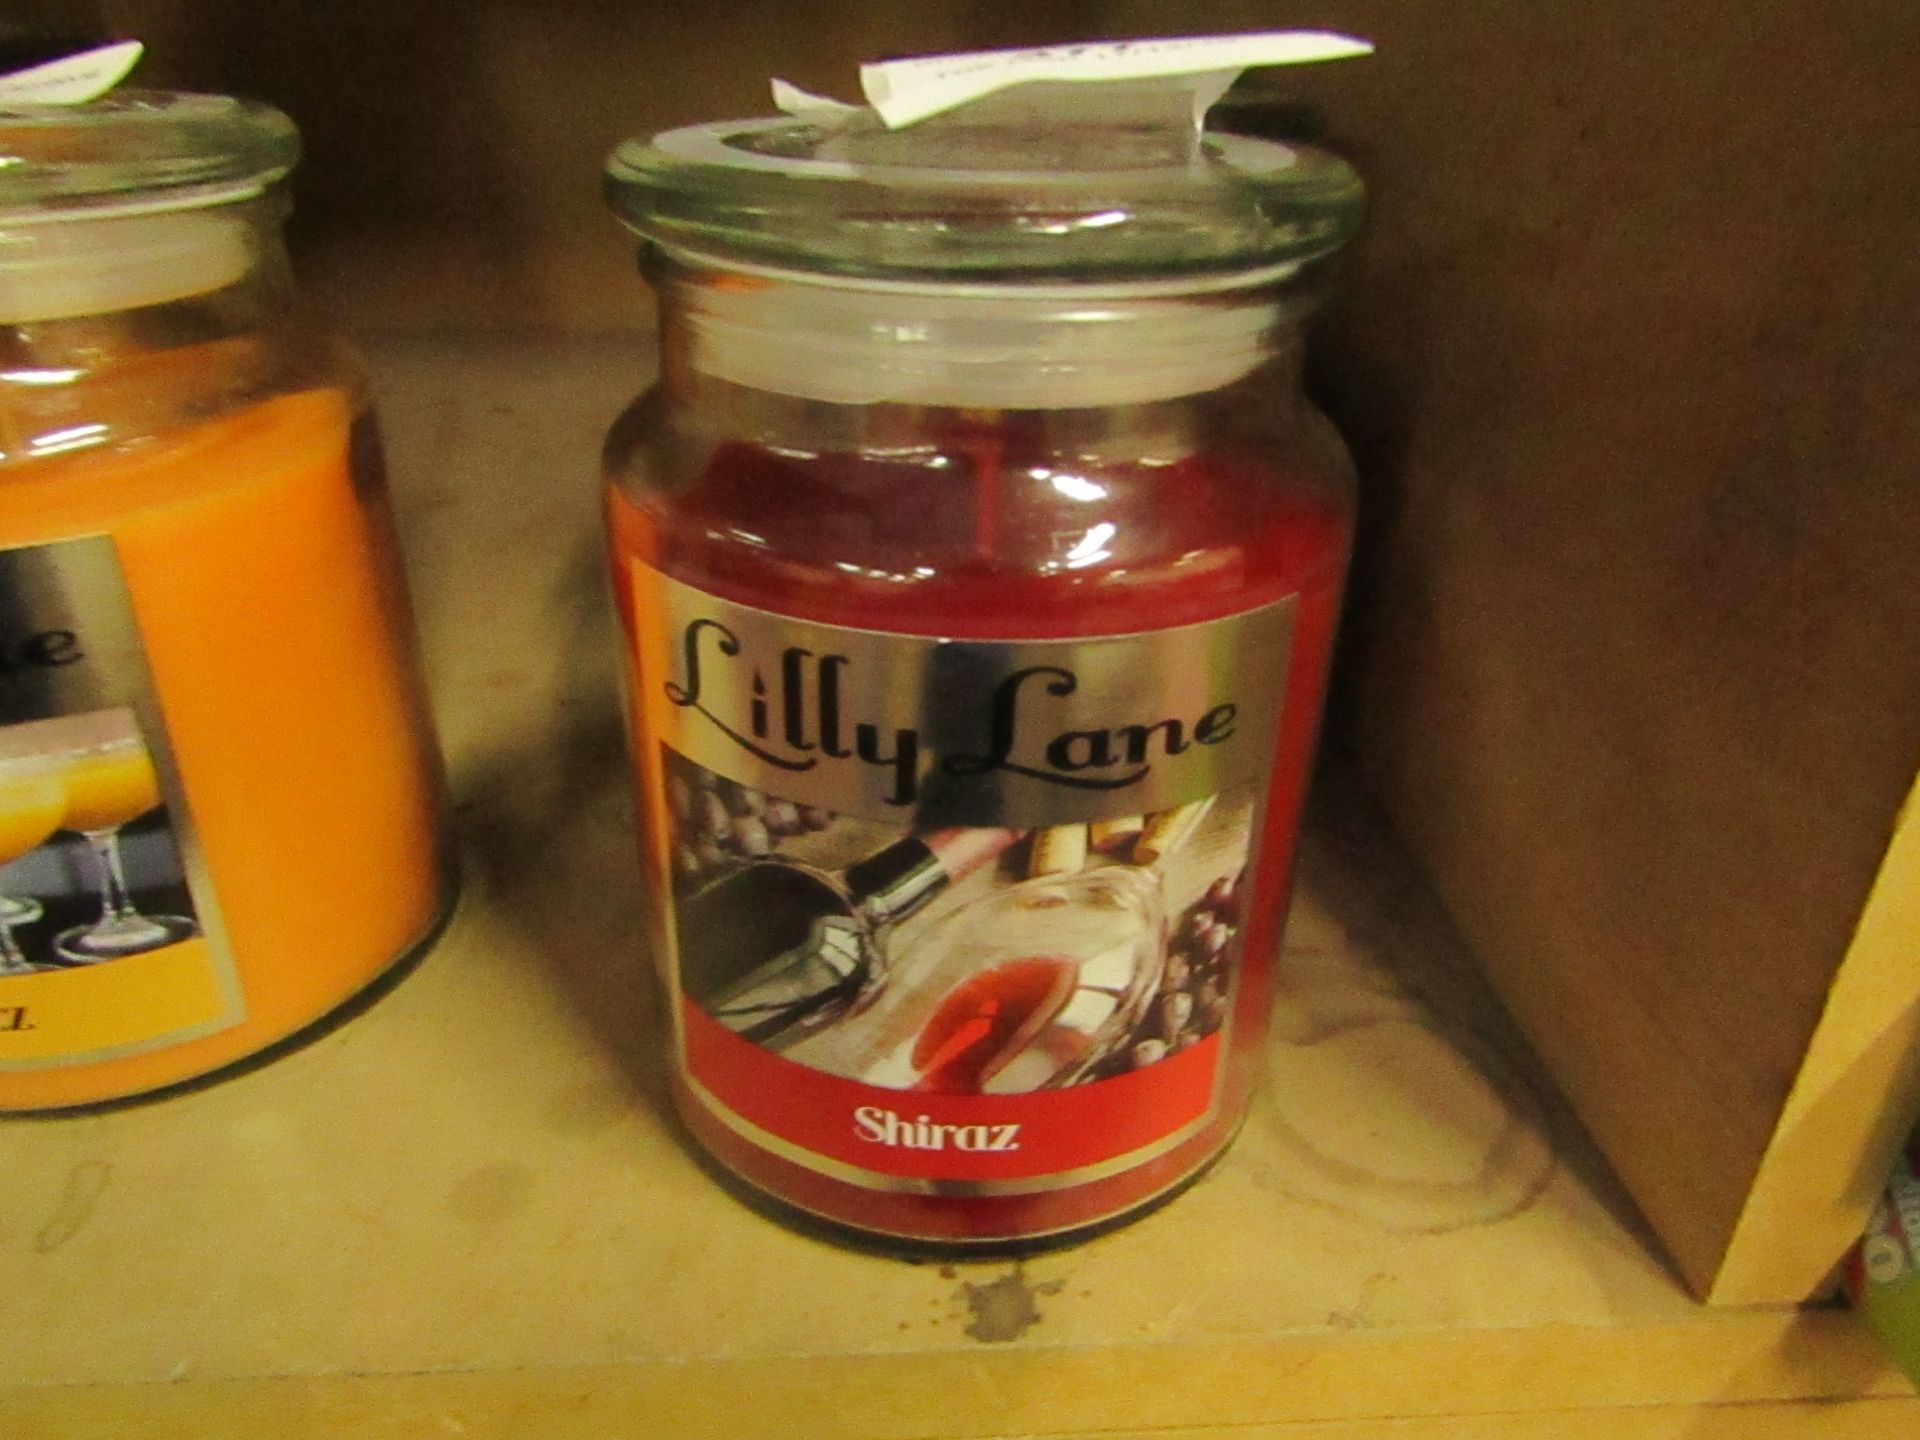 Lilly Lane Shiraz 16oz Candle in a glass jar. Smell Amazing! New